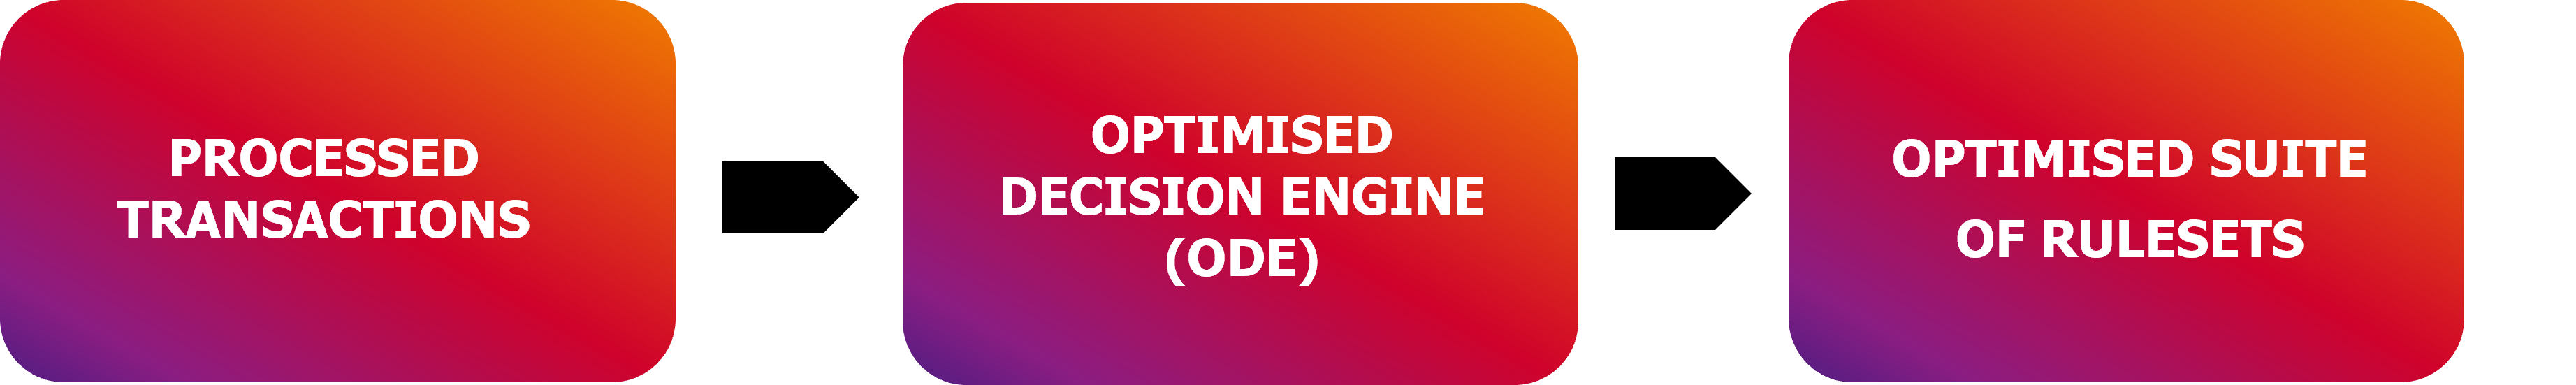 ODE Approach Image